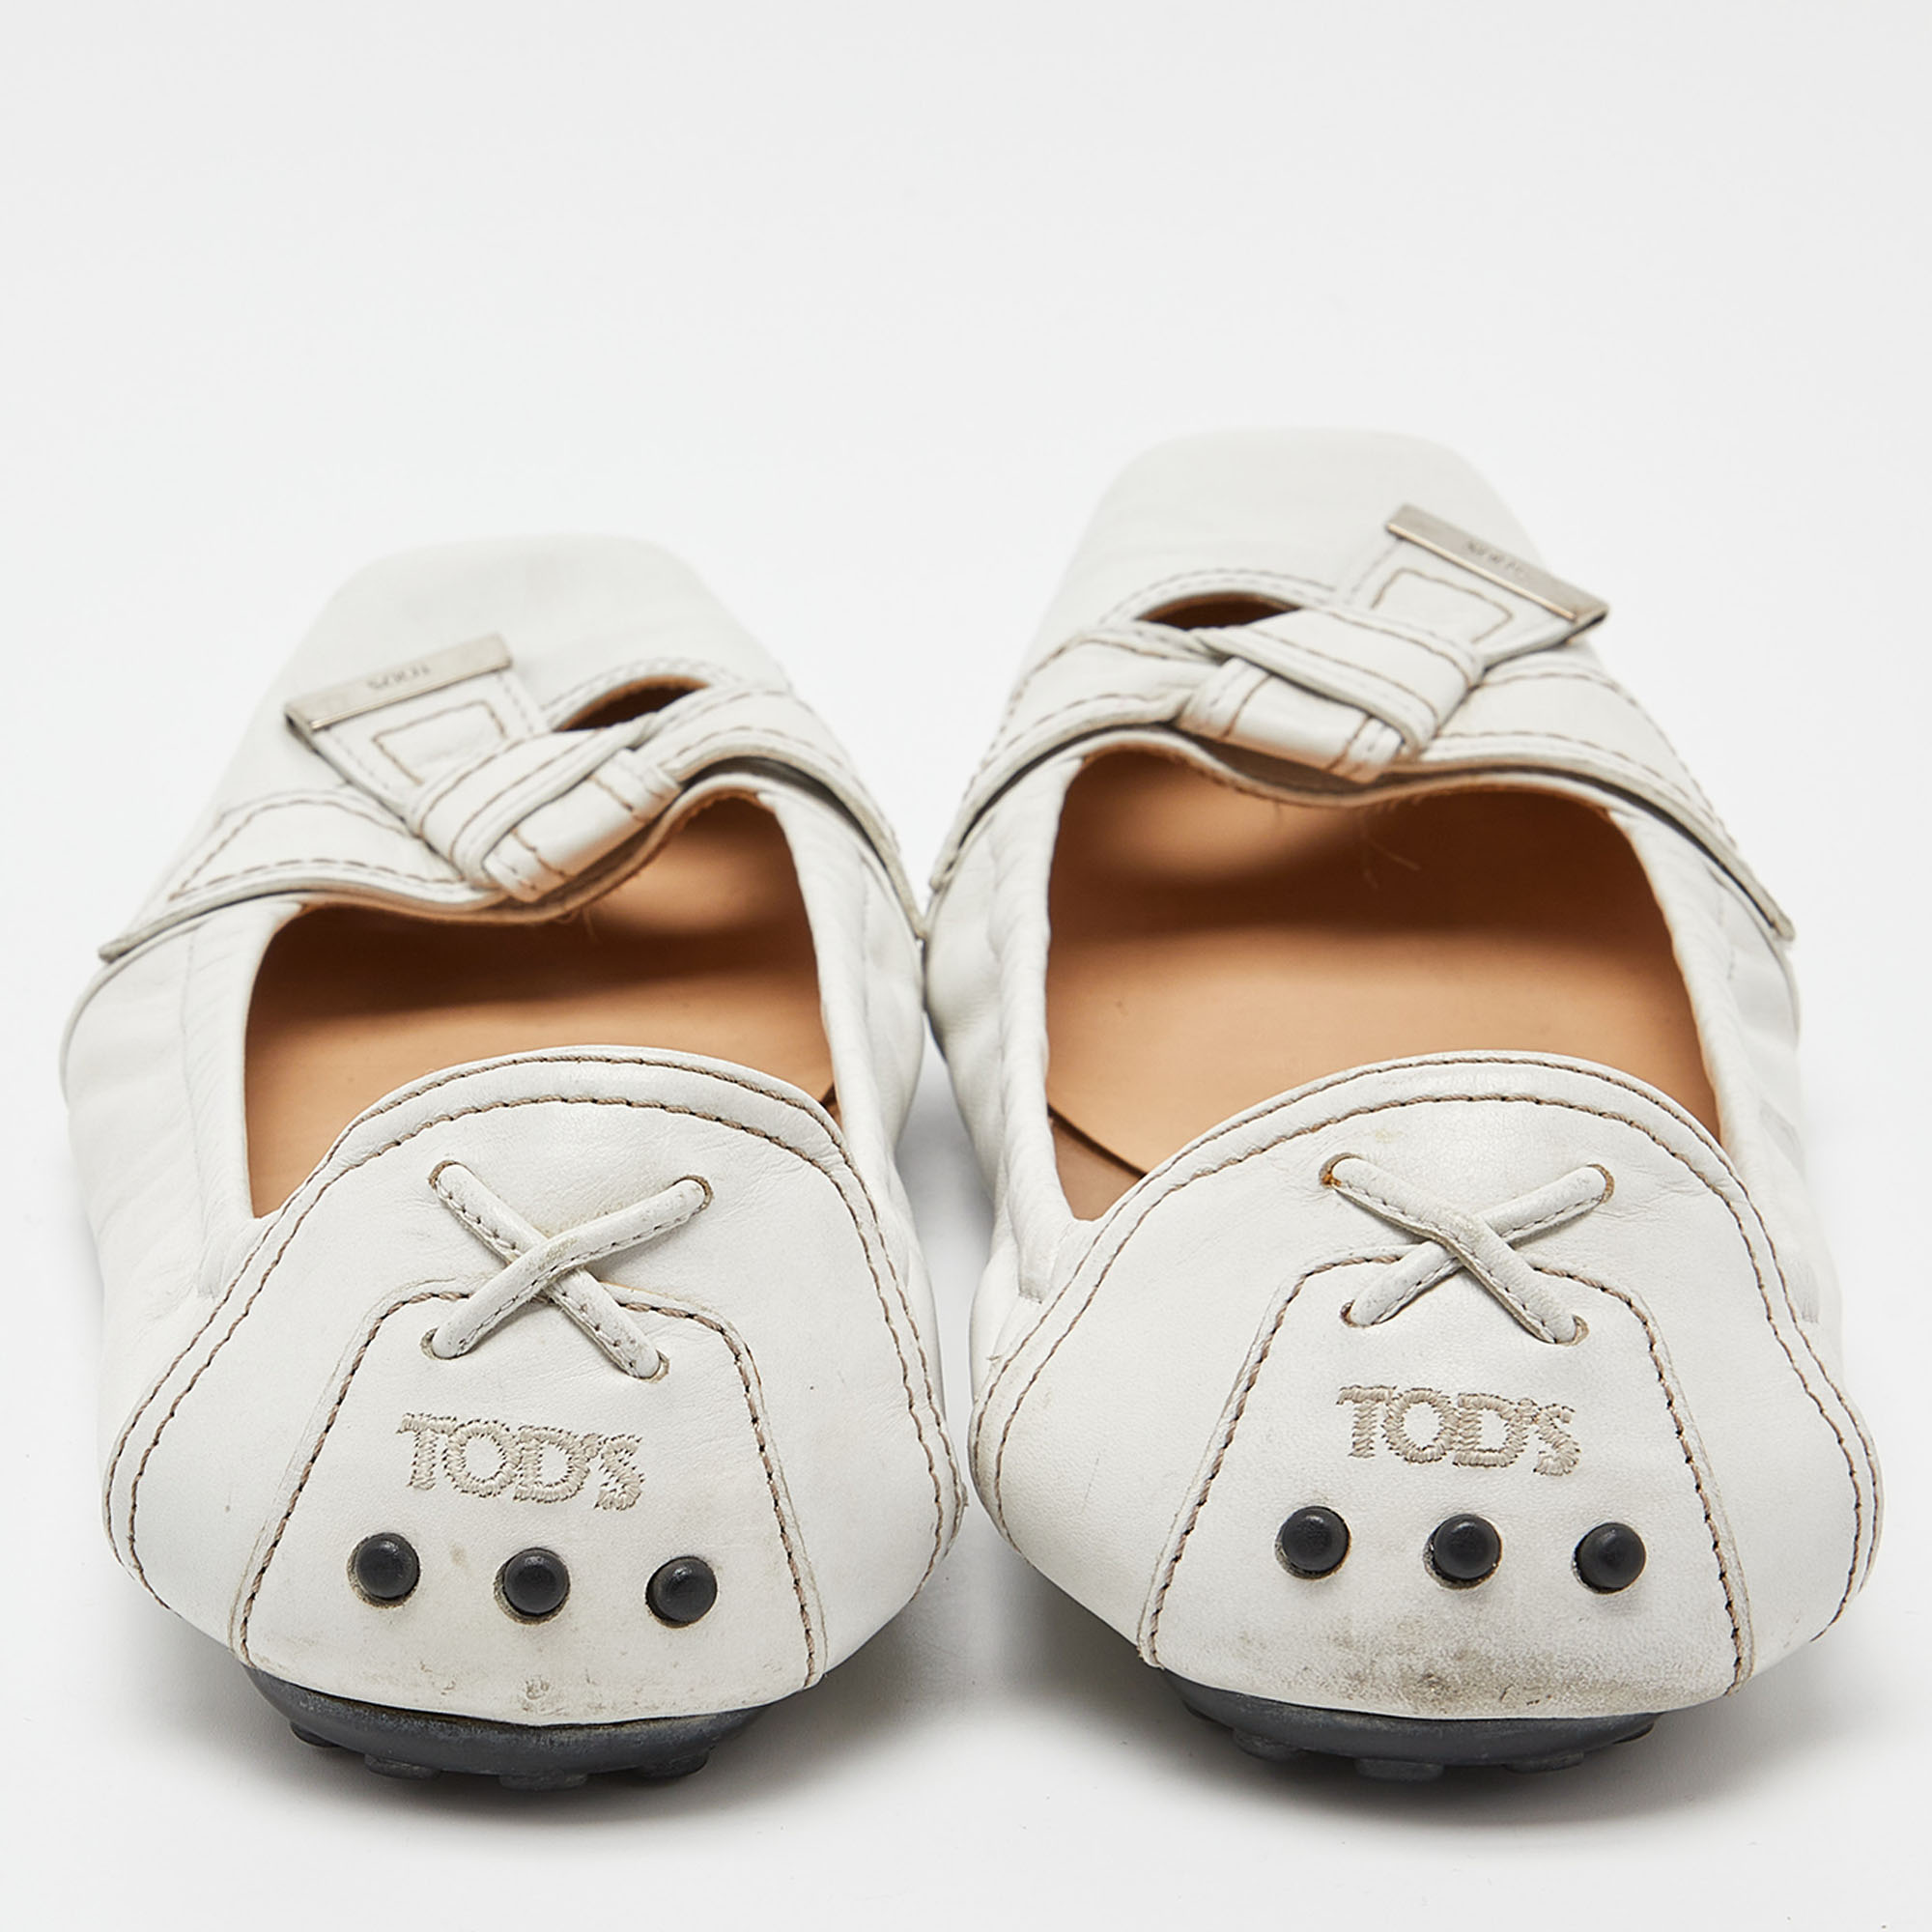 Tod's White Leather Bow Ballet Flats Size 39.5